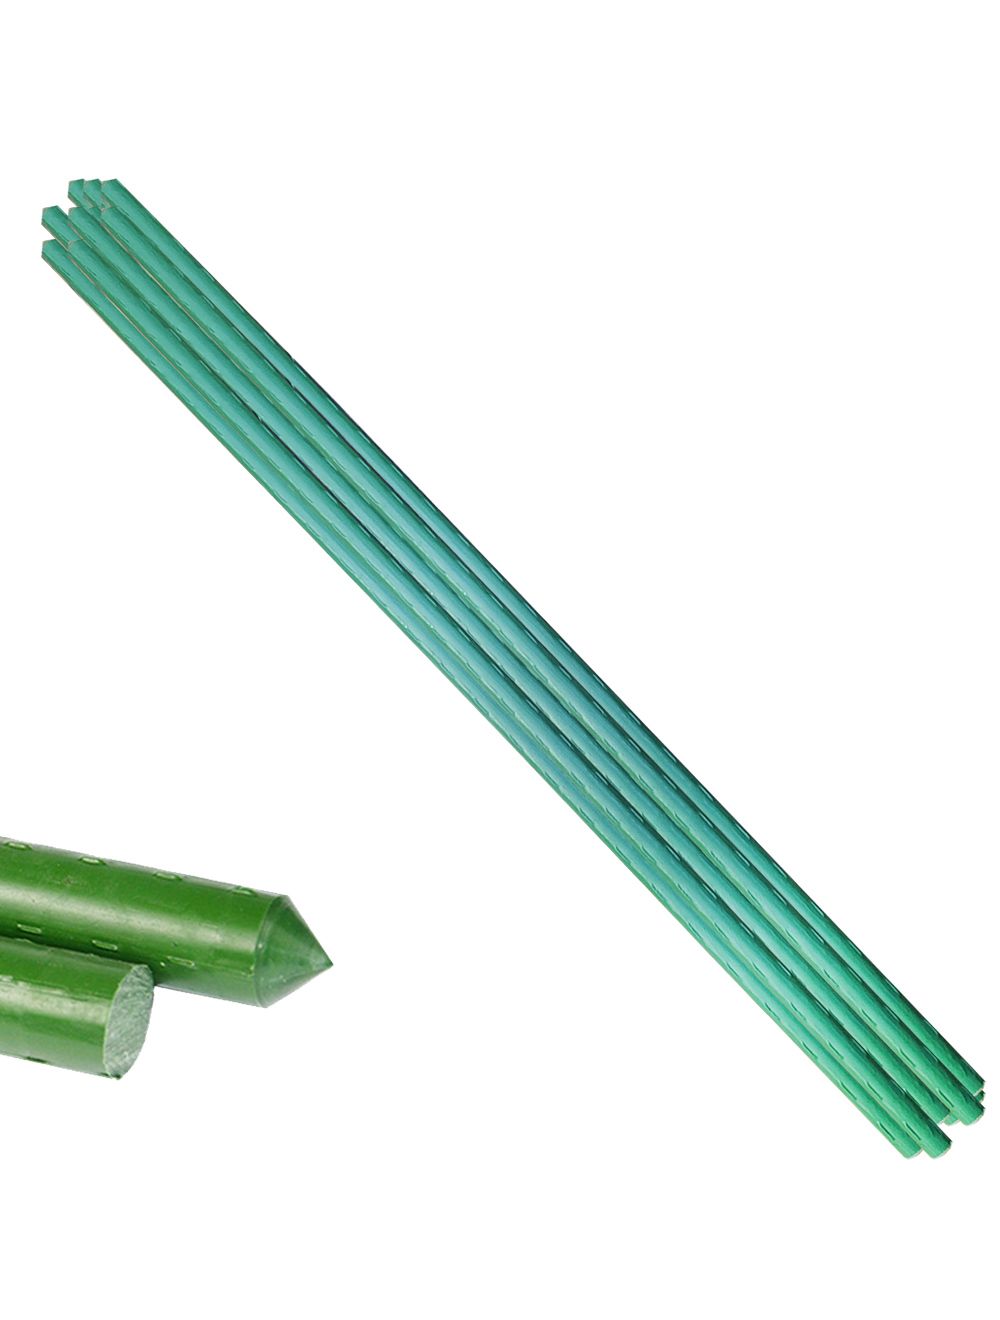 Dody Online Store Garden Stakes Plant Support Metal Yard Sticks Replace  Bamboo Local Pickup, Local Shop, Drop Shipping